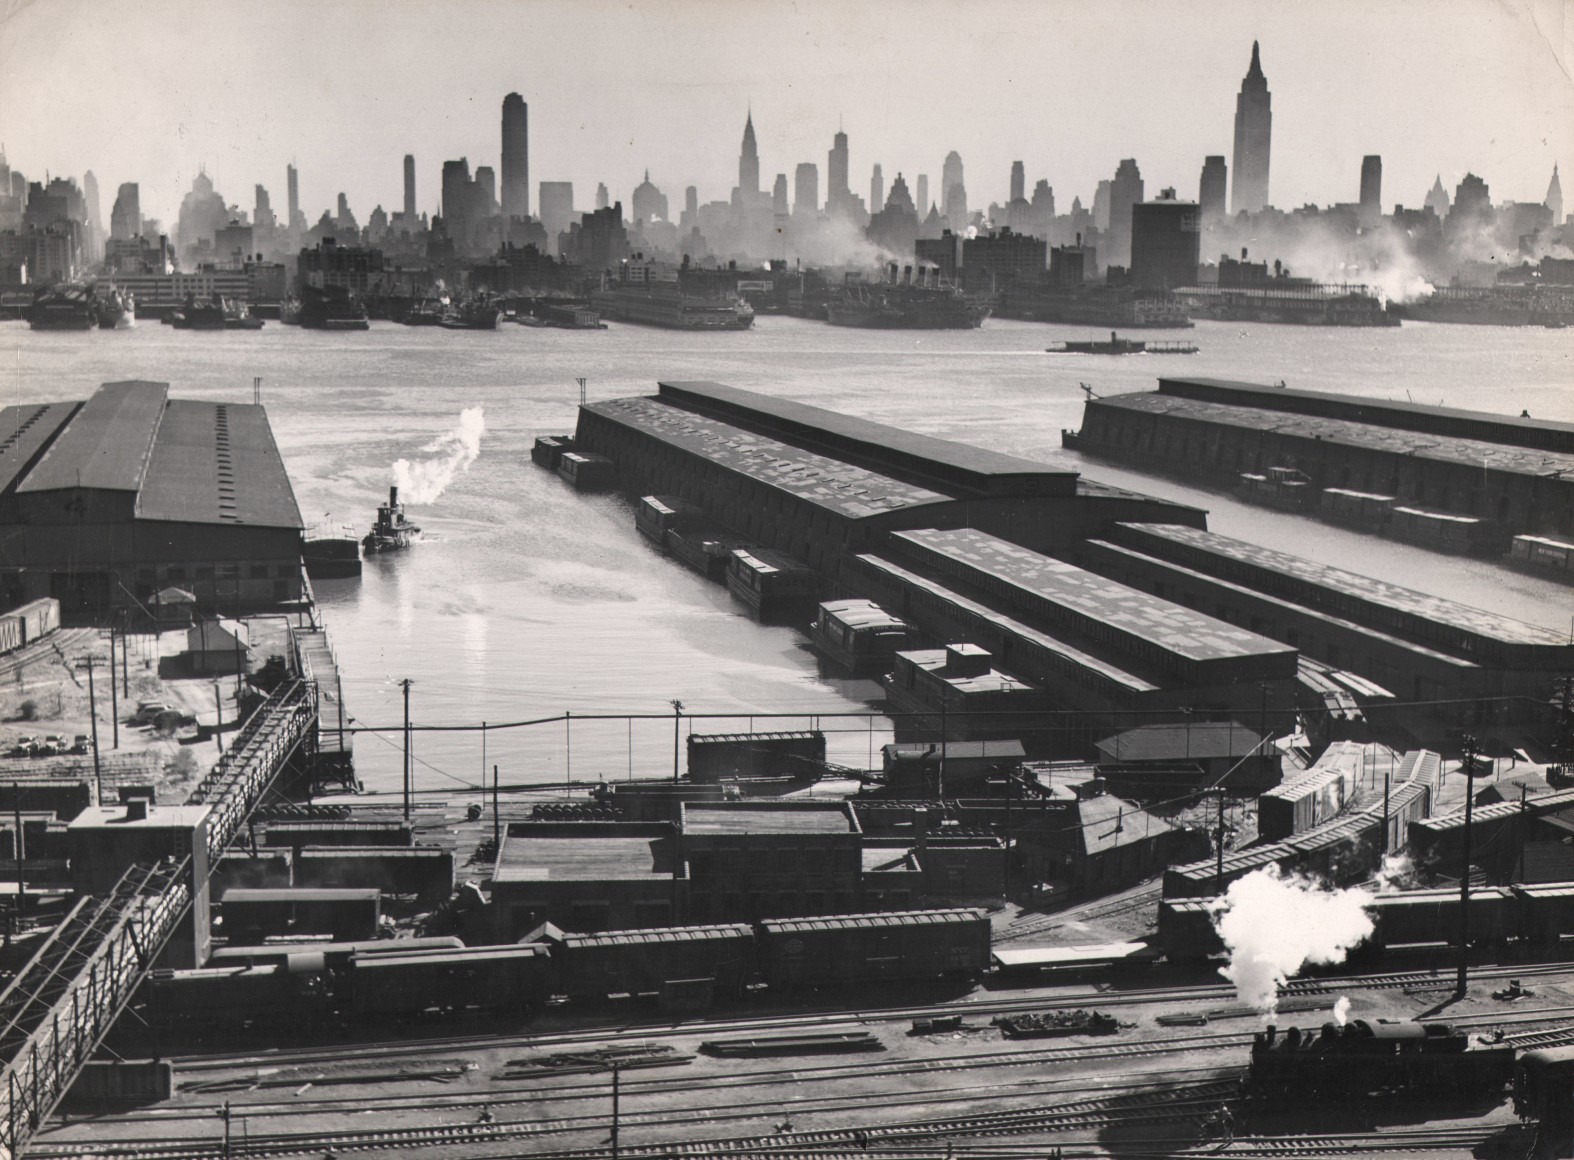 6B. Esther Bubley, Untitled, 1946. Train tracks in the foreground. Piers extend into the a river in the midground with the city skyline in the background.